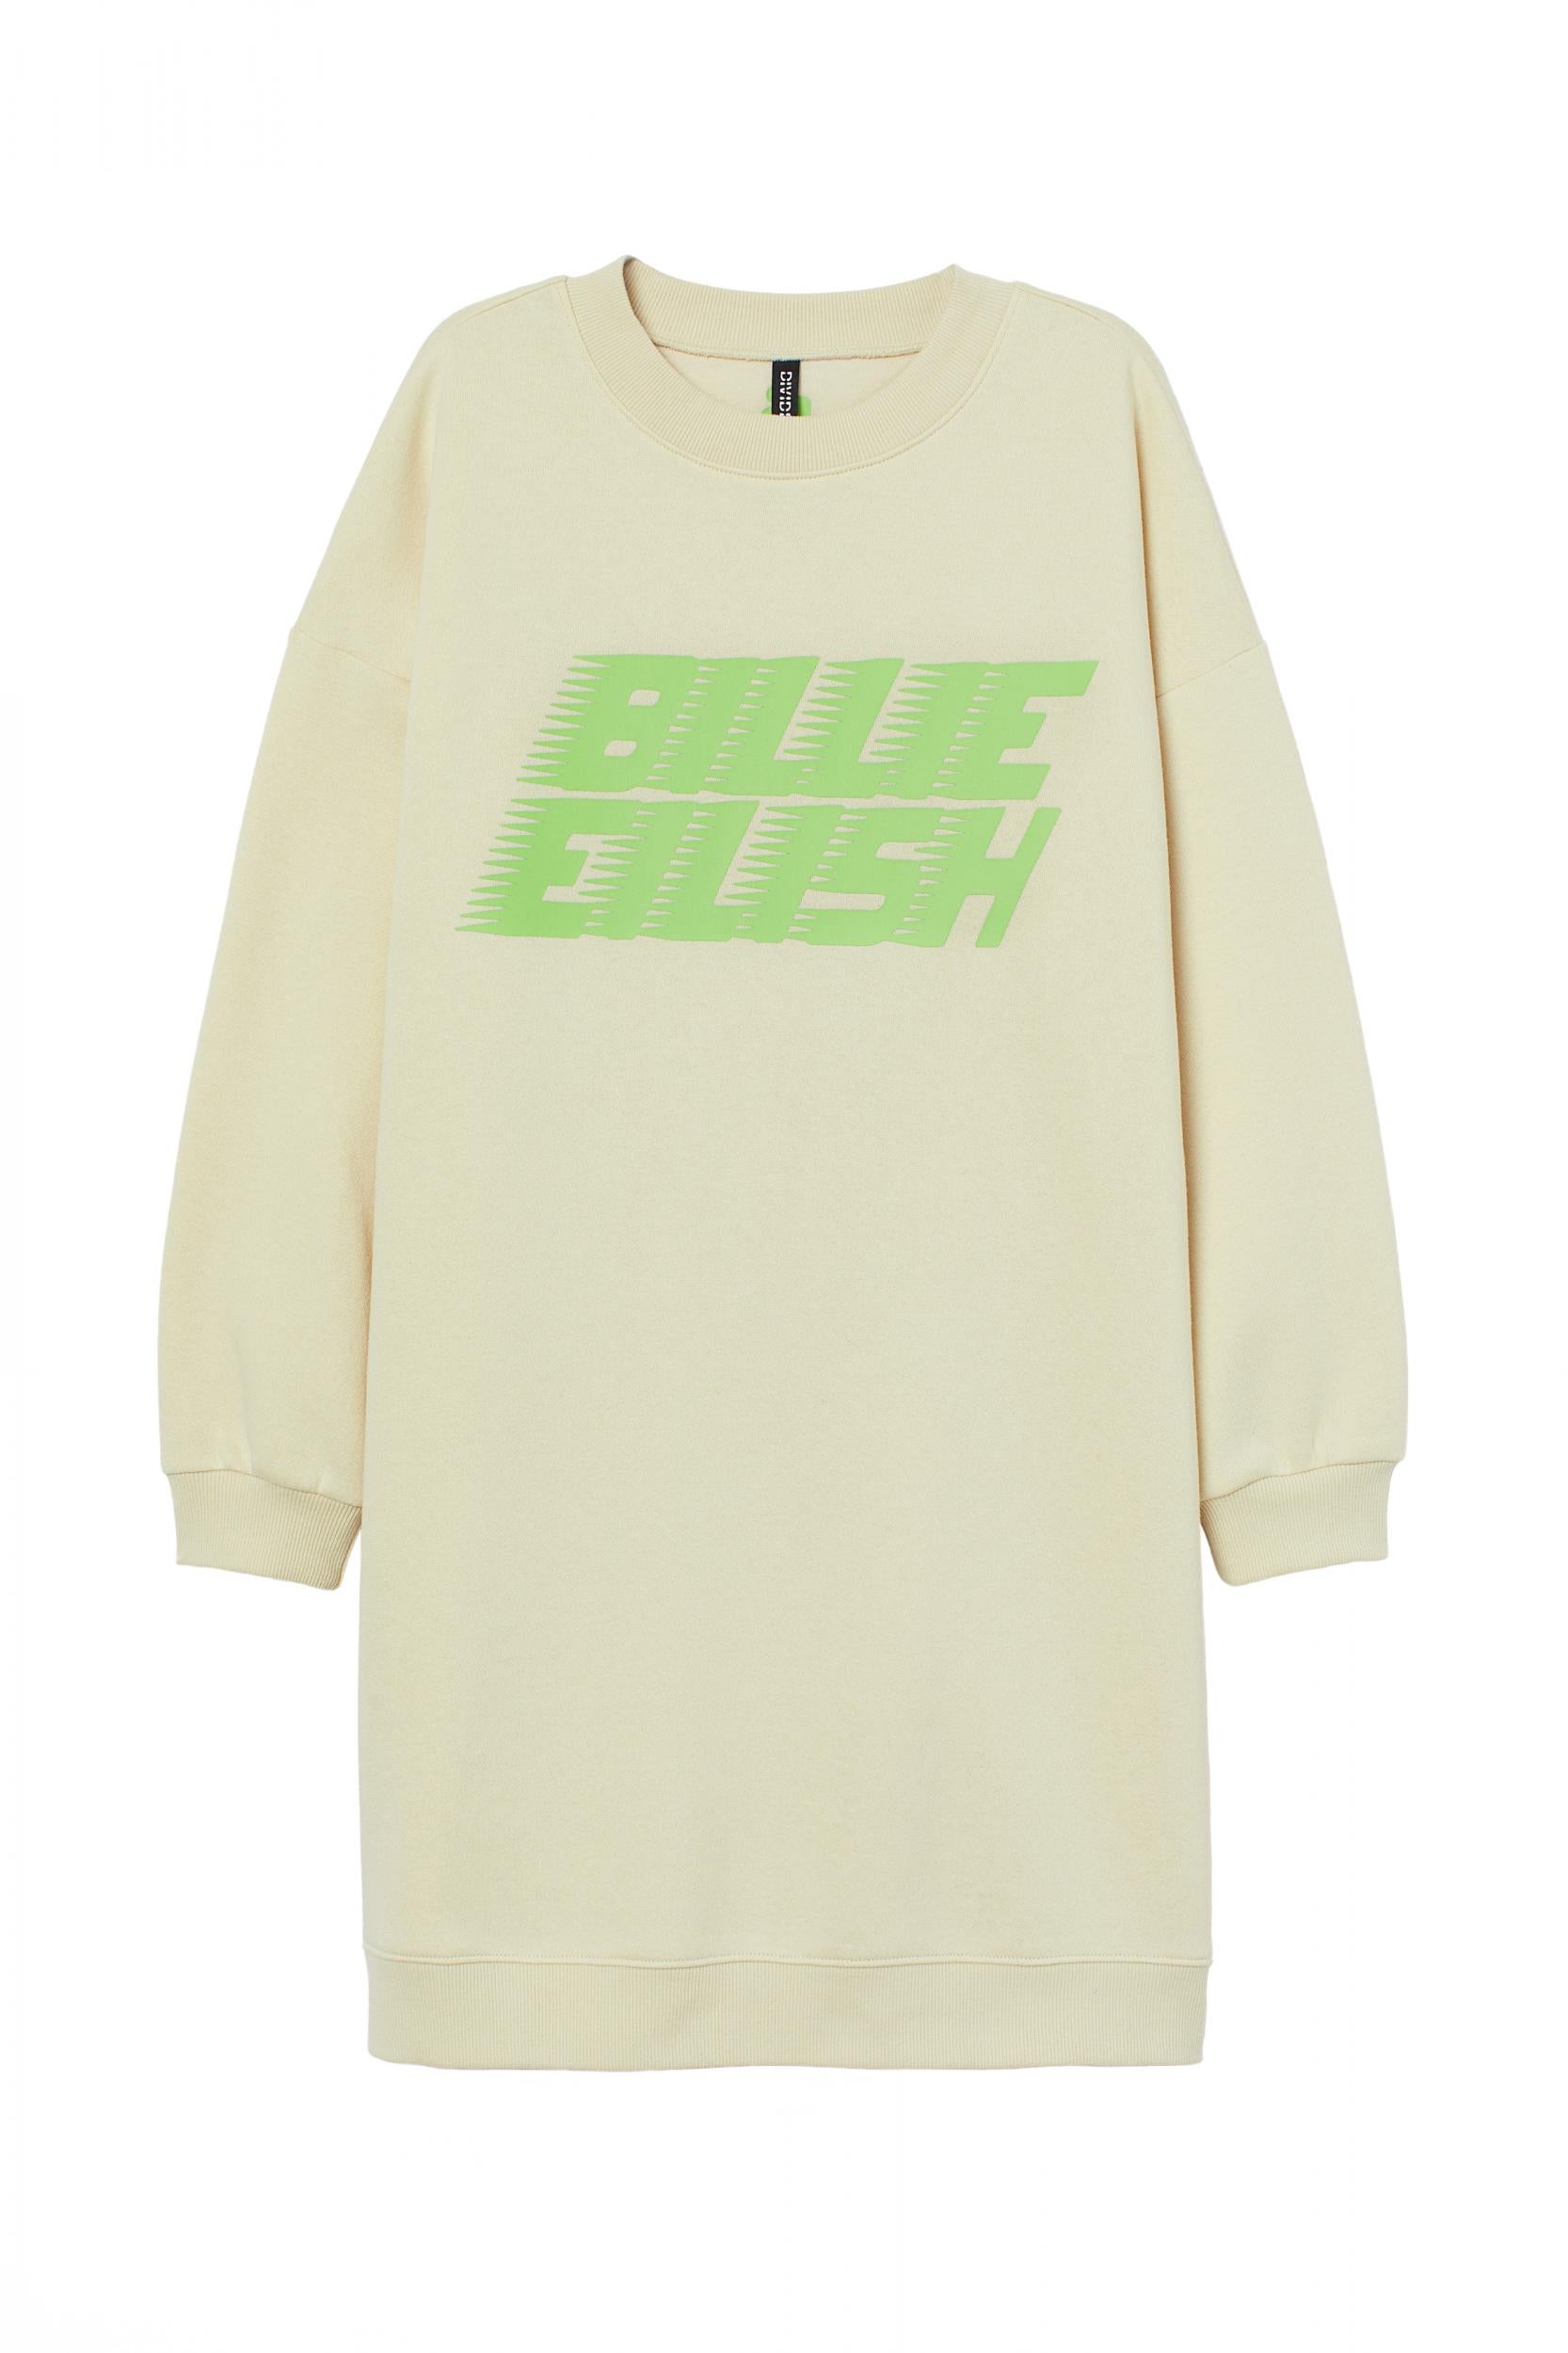 Billie Eilish Releases Sustainable Clothing Collection At H M